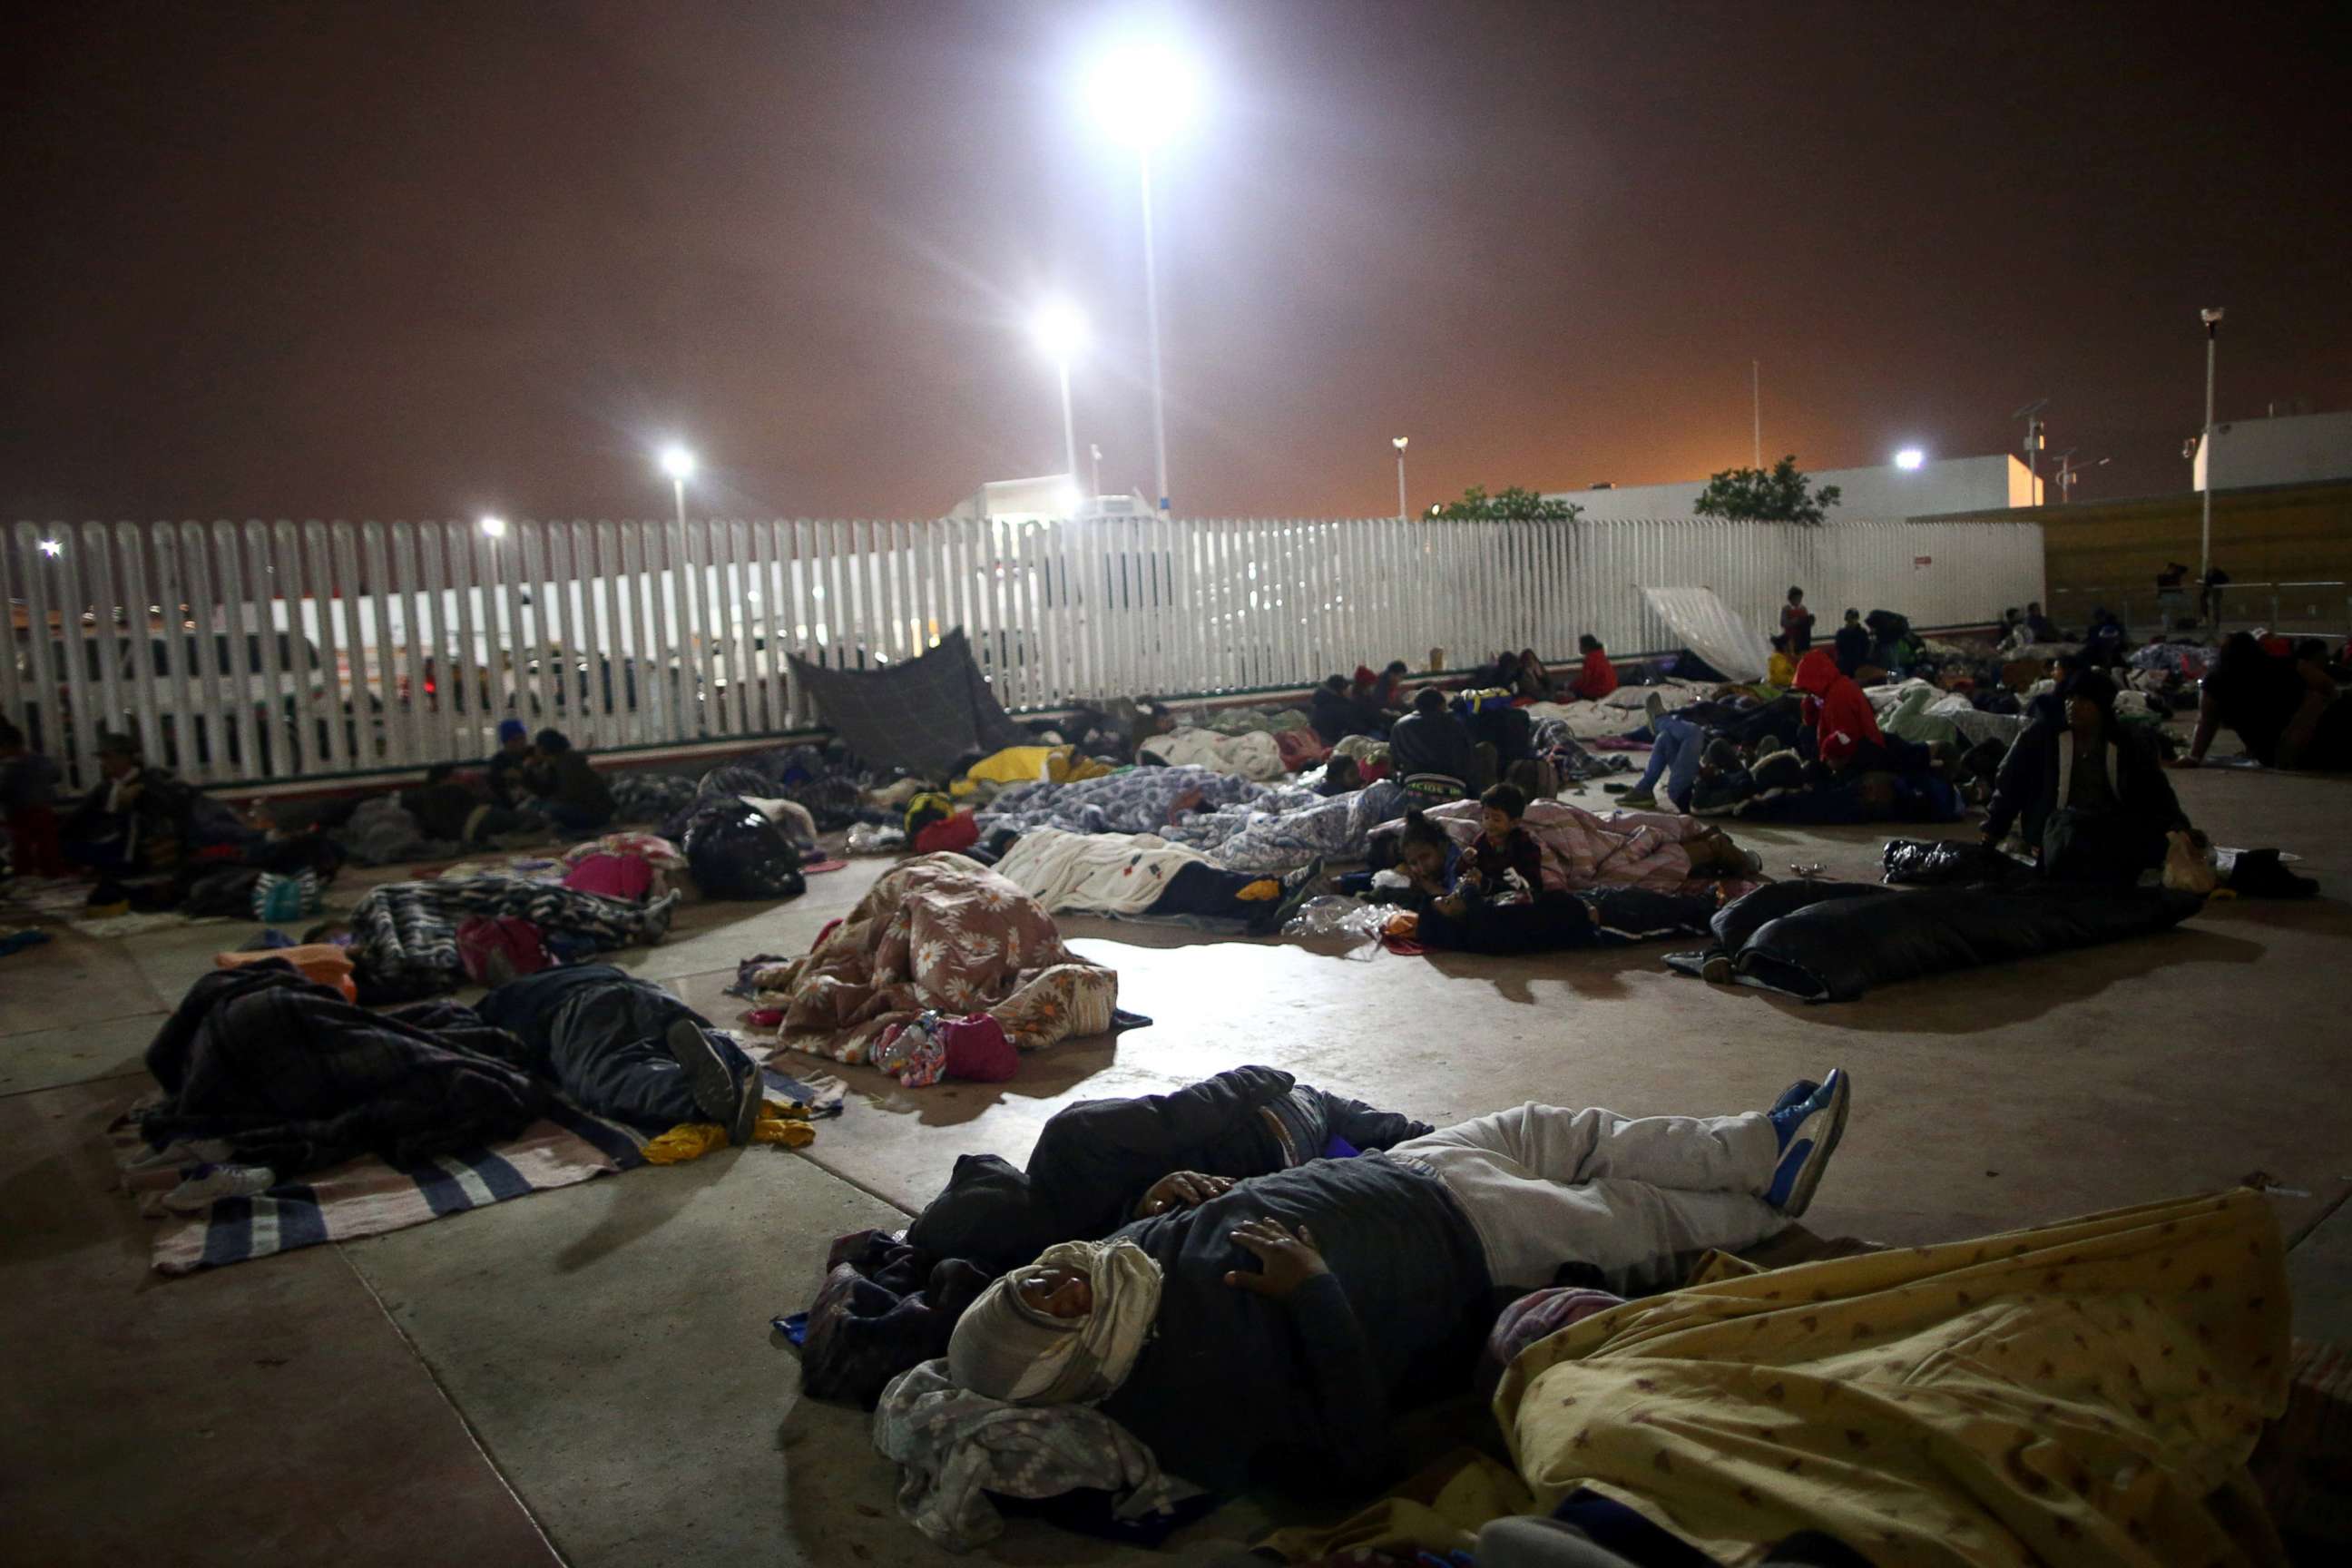 Members of a caravan of migrants from Central America sleep near the San Ysidro checkpoint after a small group of fellow migrants entered the U.S. border and customs facility, where they are expected to apply for asylum in Tijuana, Mexico, April 29, 2018.